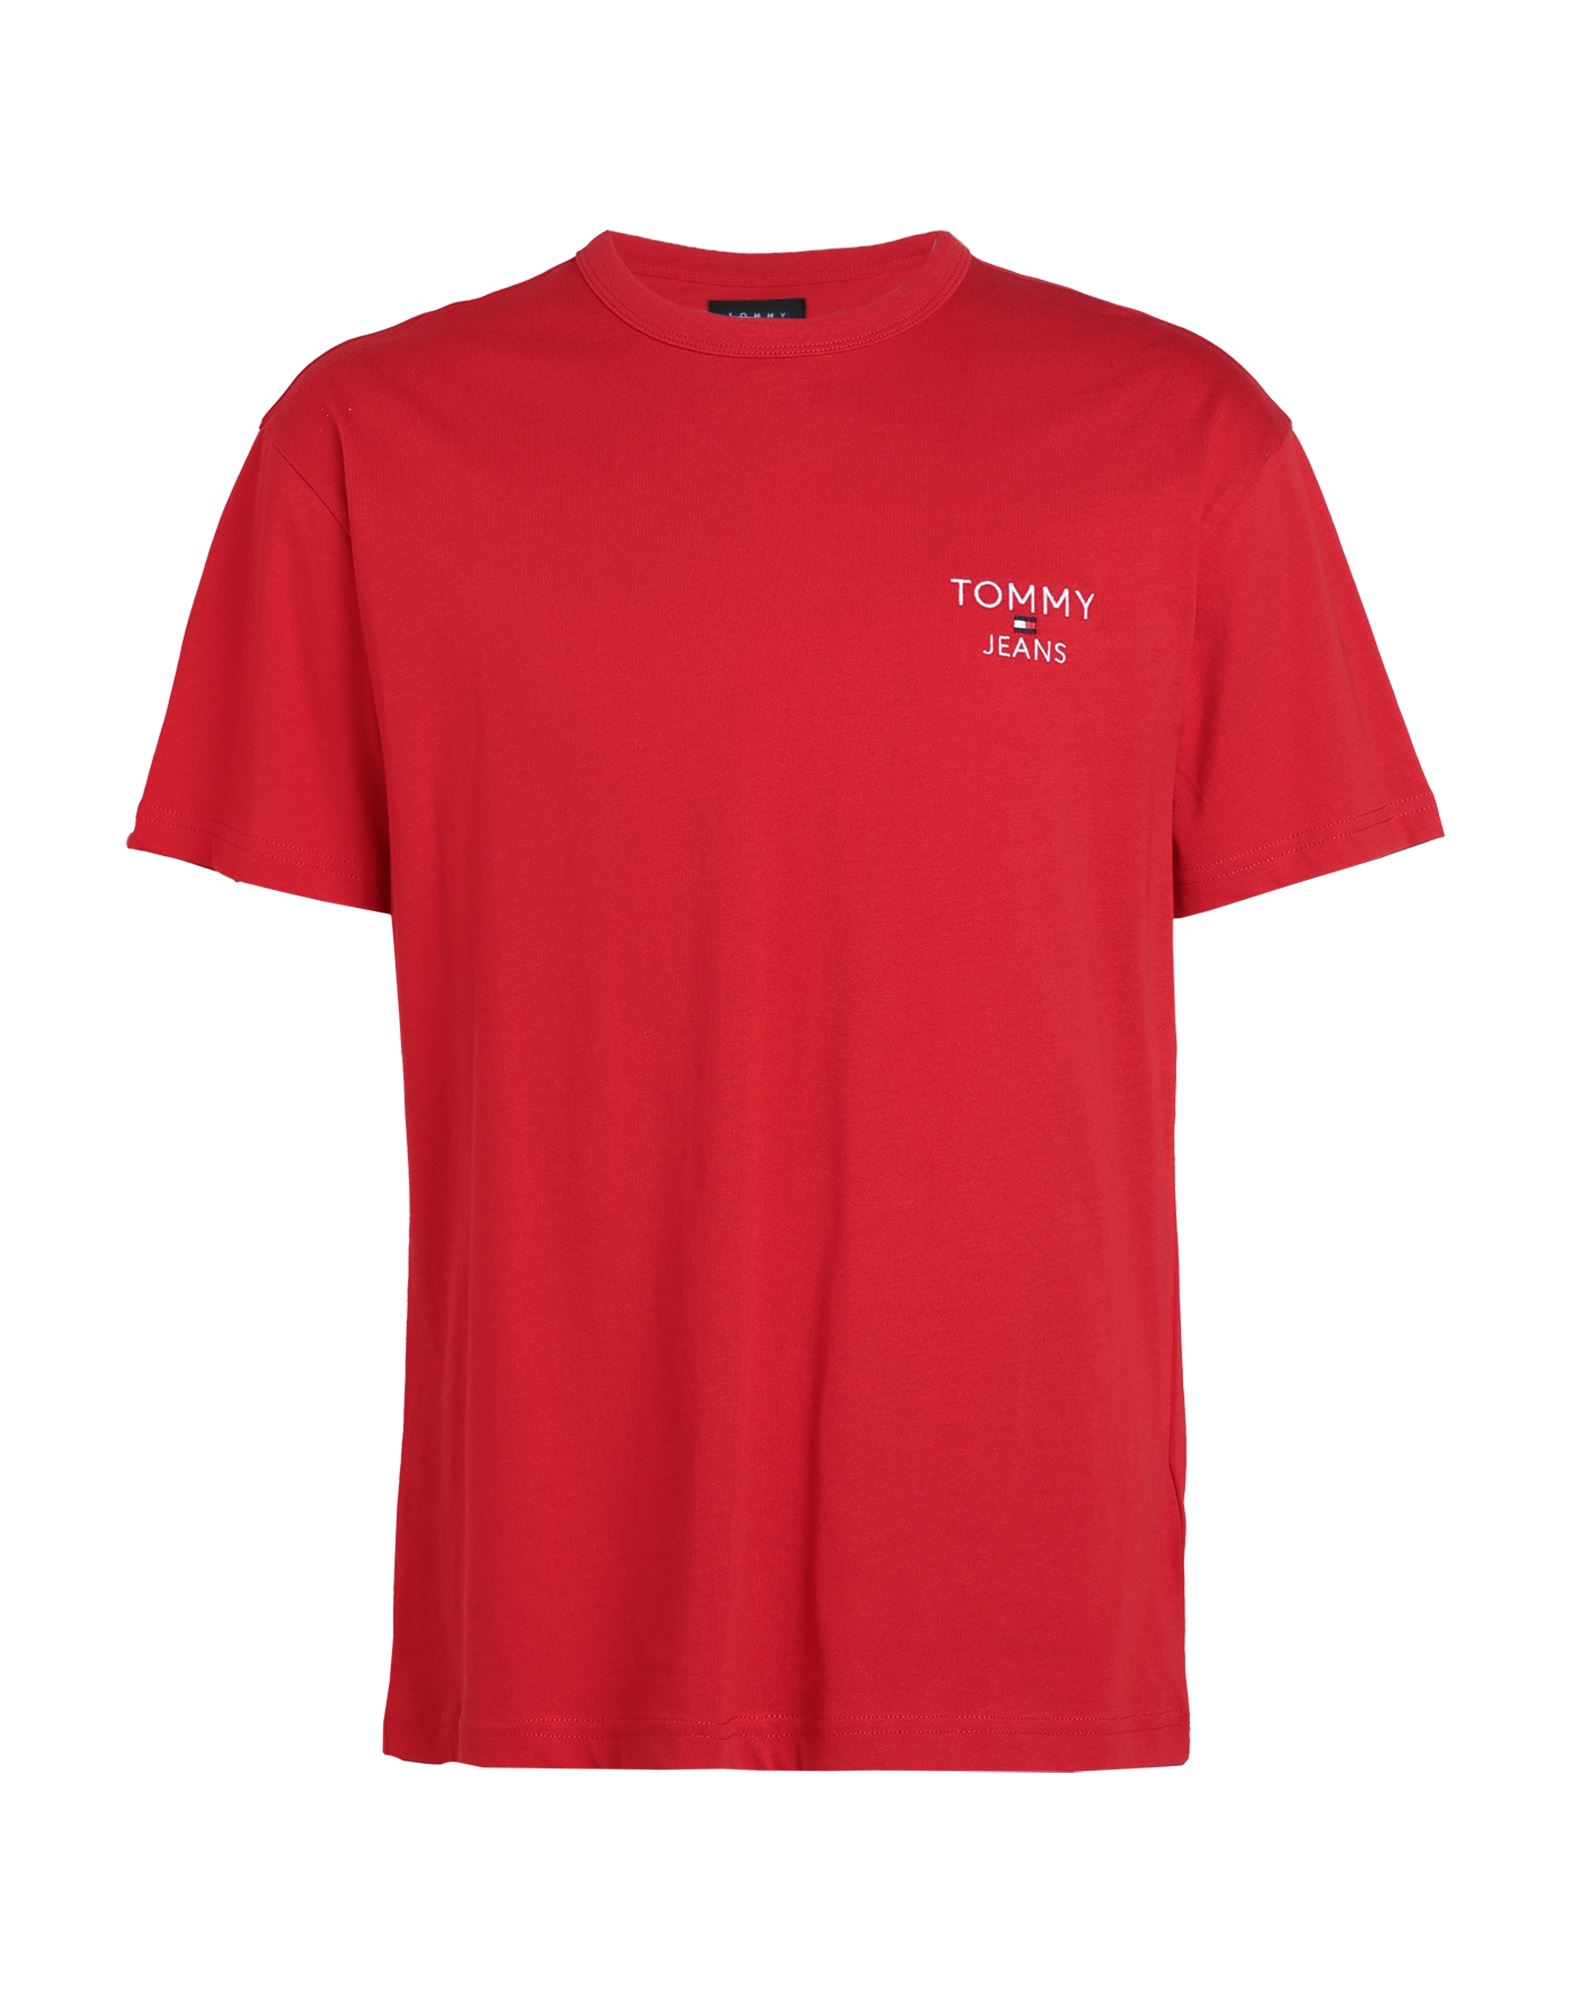 TOMMY JEANS T-shirts Herren Rot von TOMMY JEANS